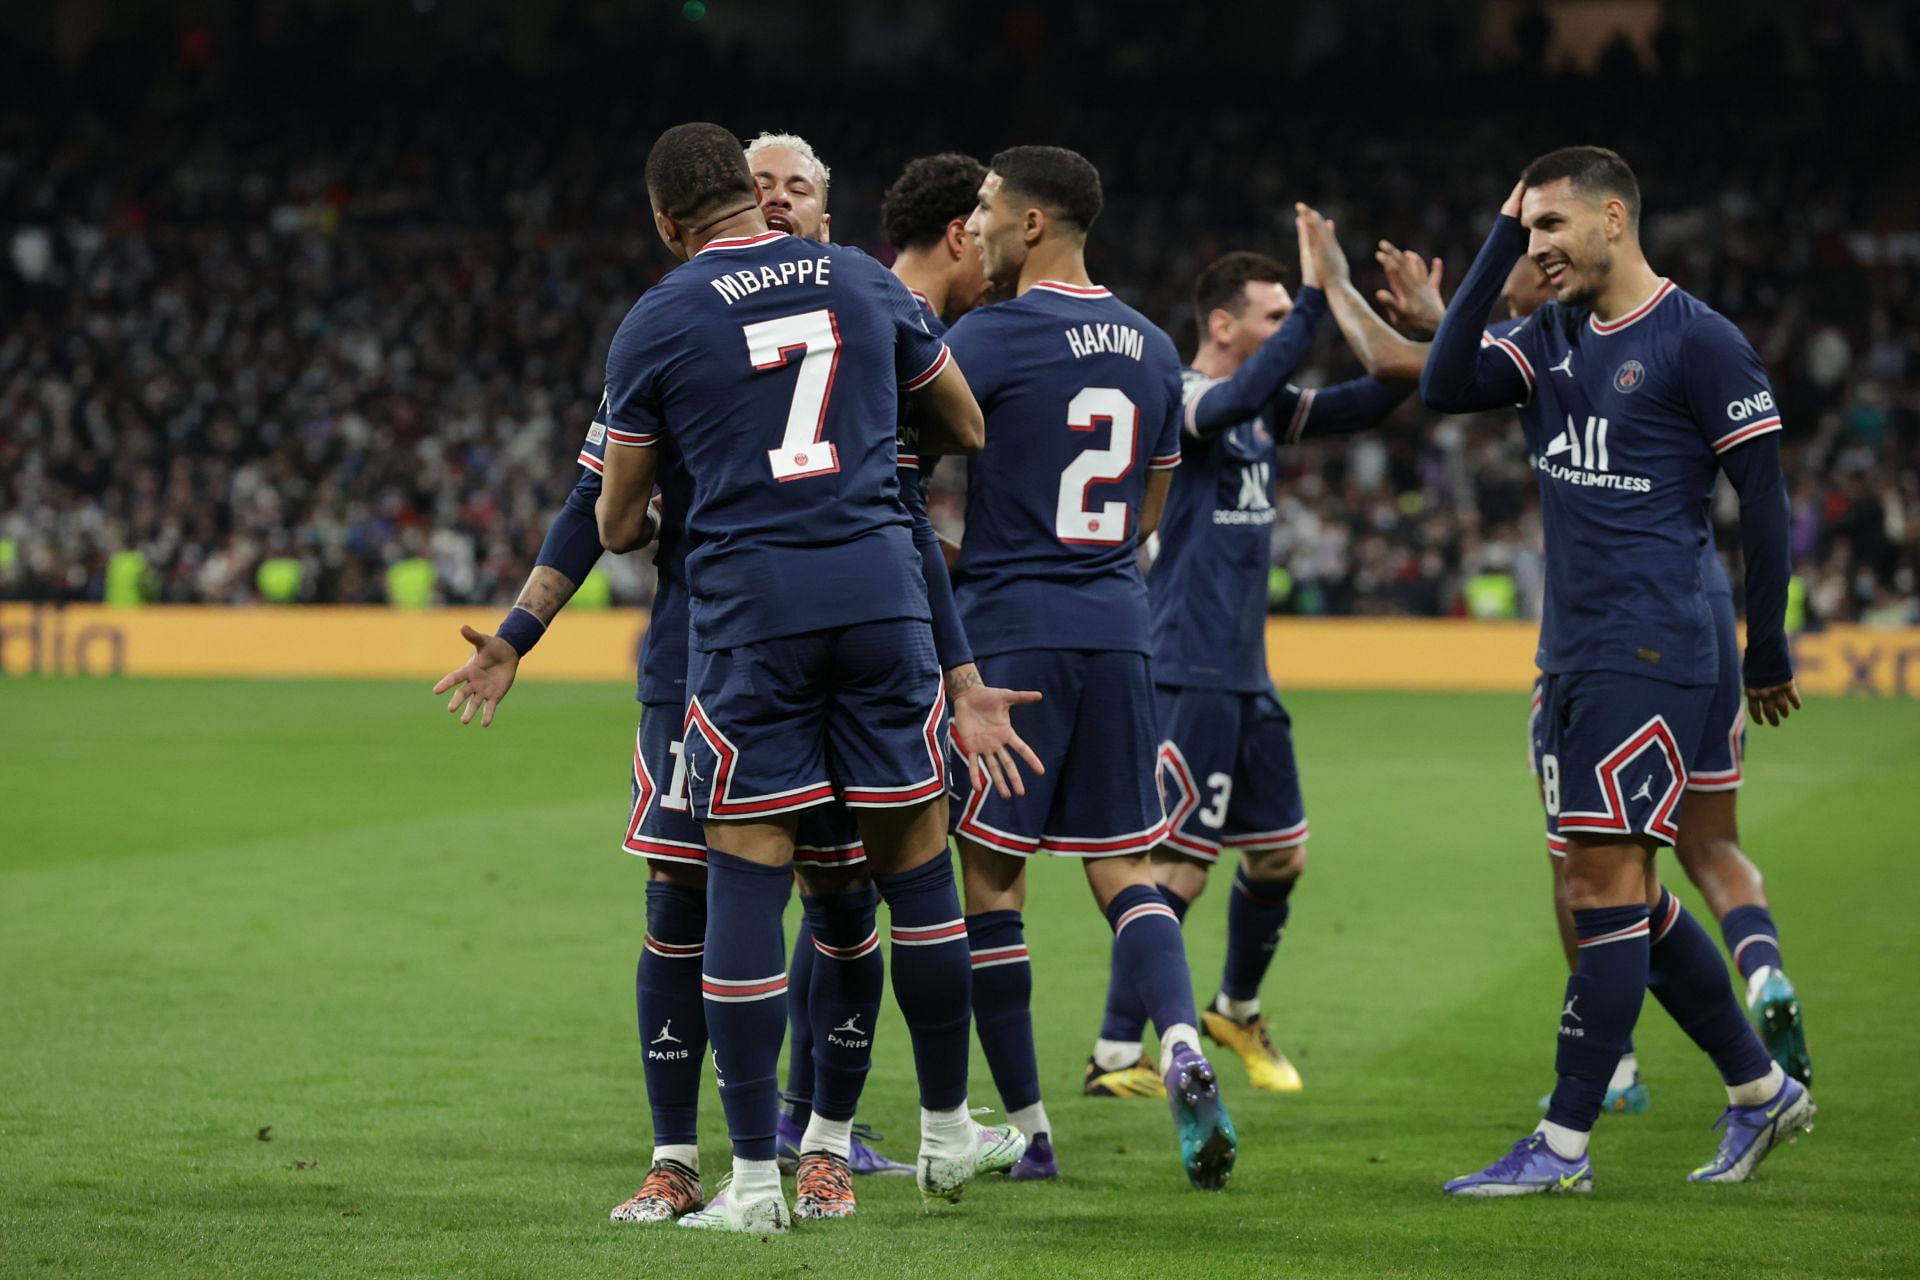 PSG let a two-goal lead slip against Real Madrid